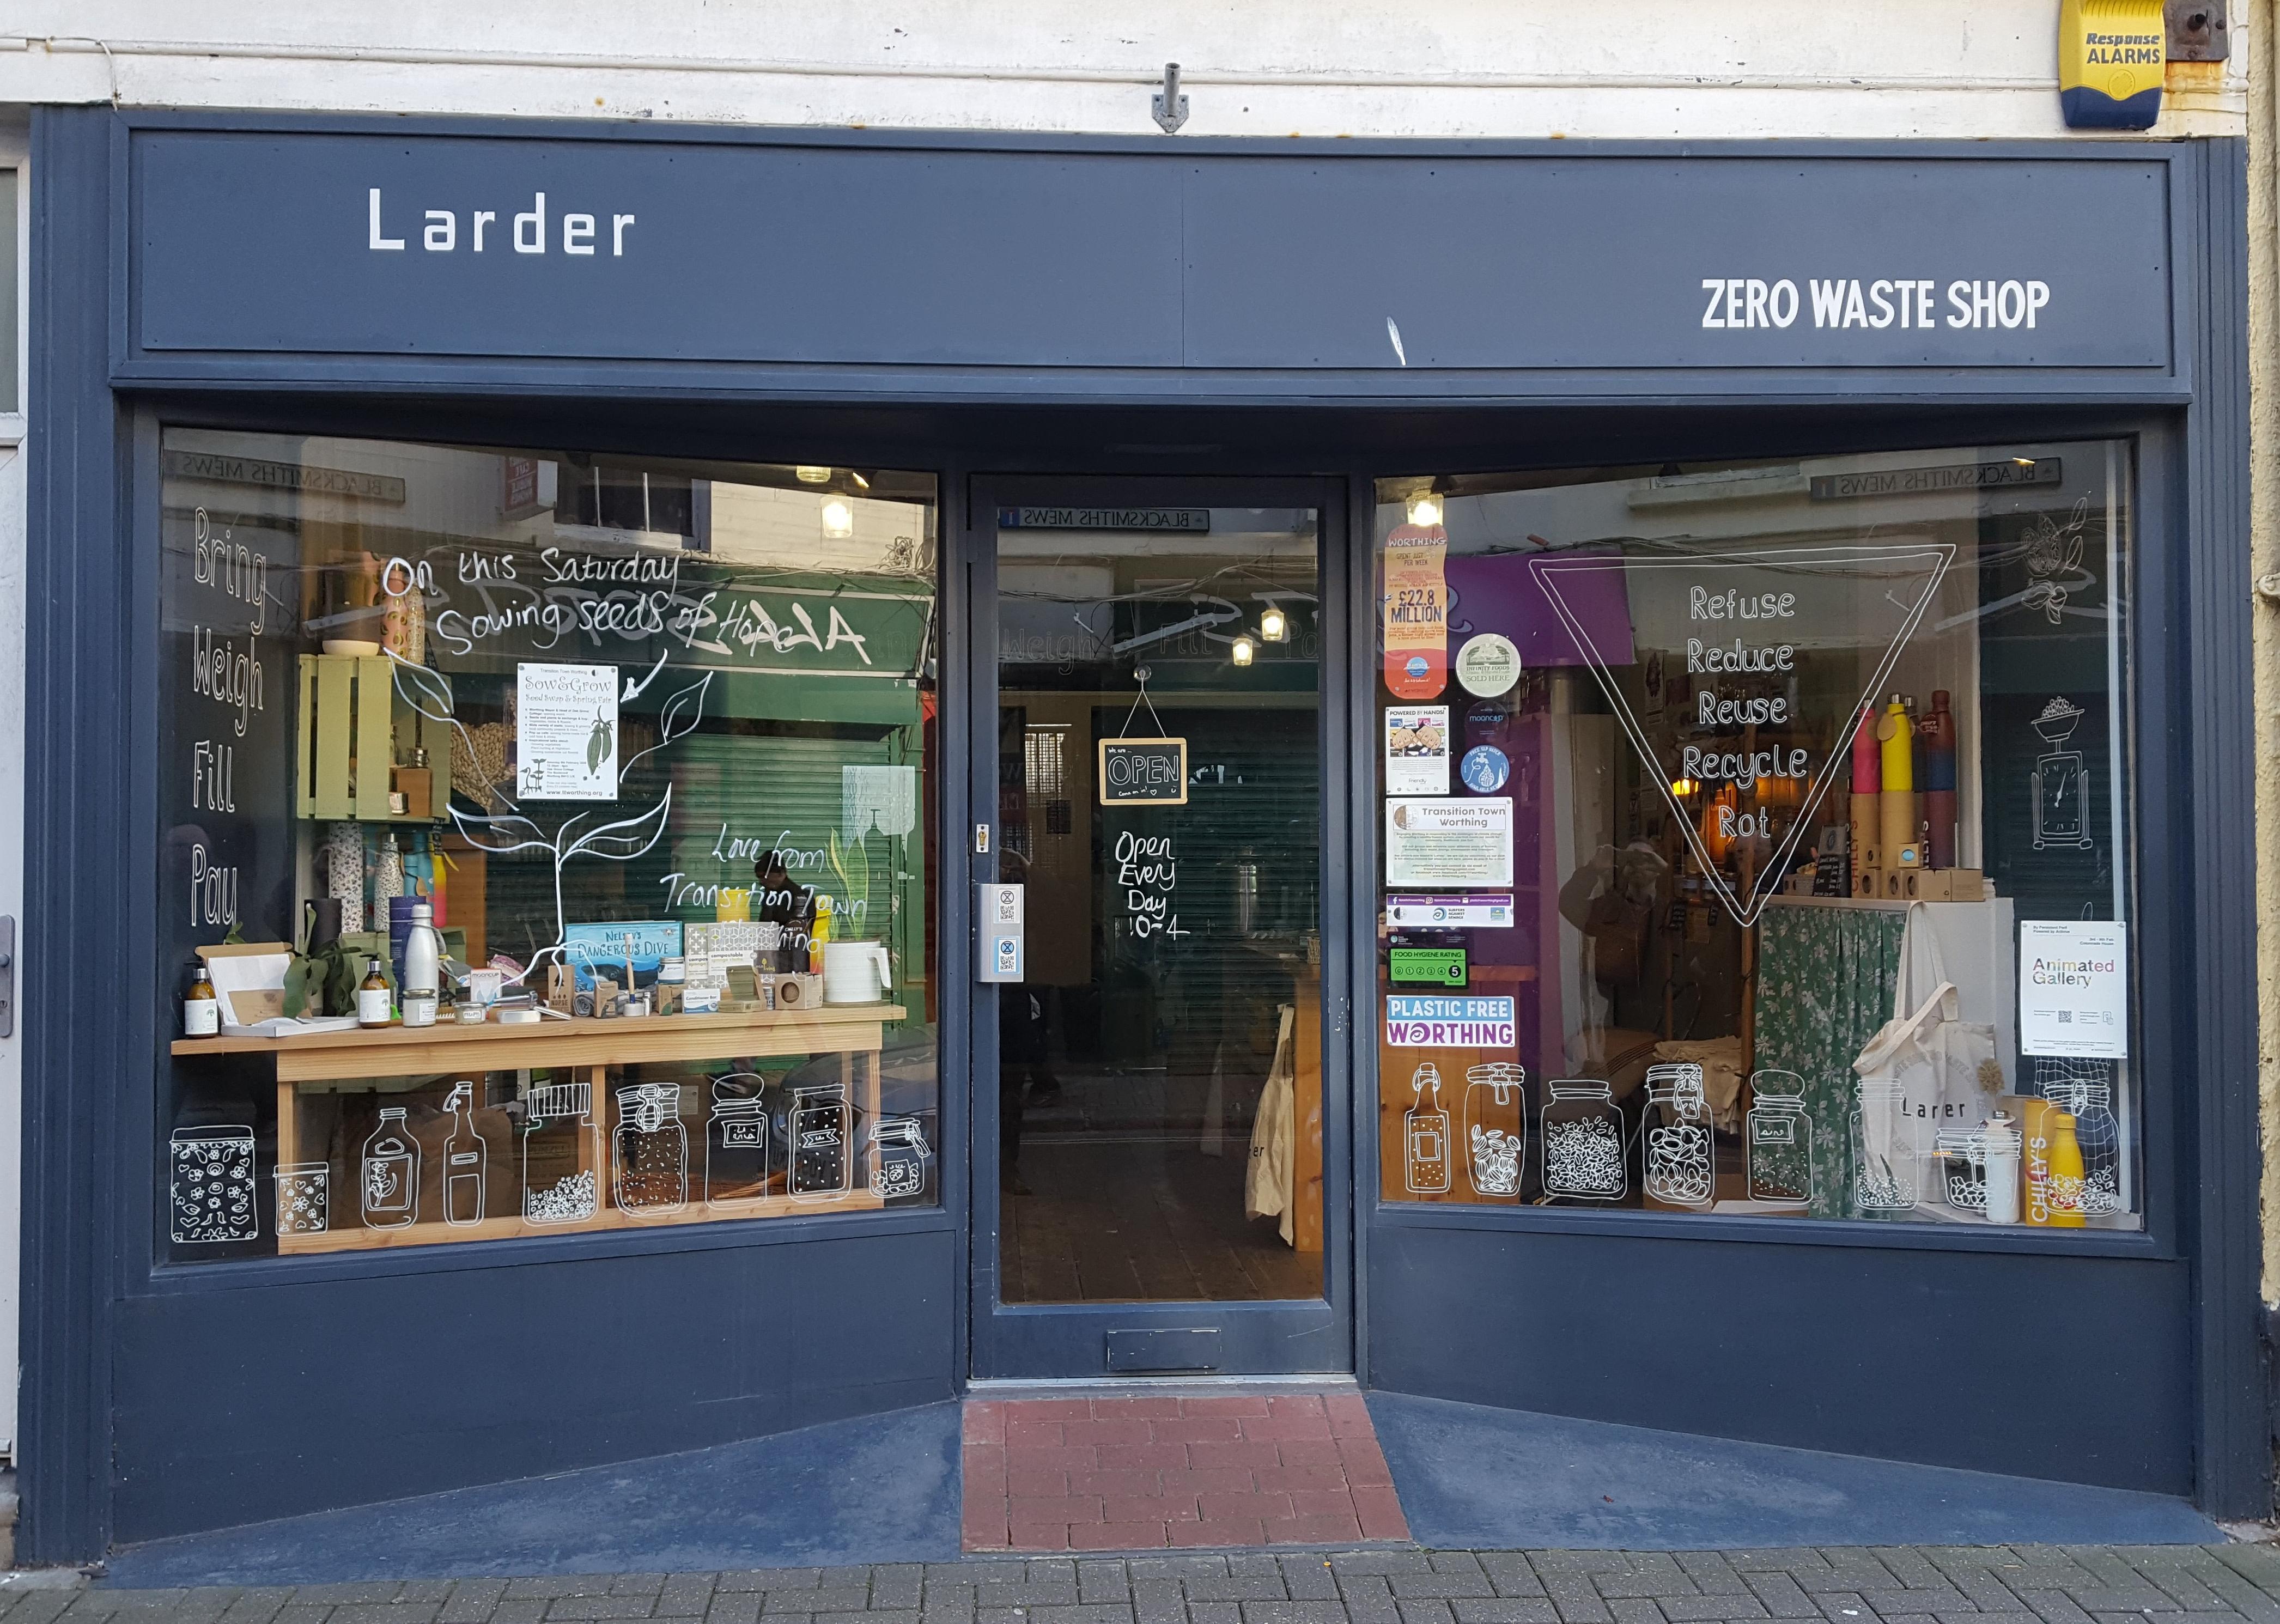 In November 2018, this zero waste store started selling its sustainable wares at the western end of Montague Street